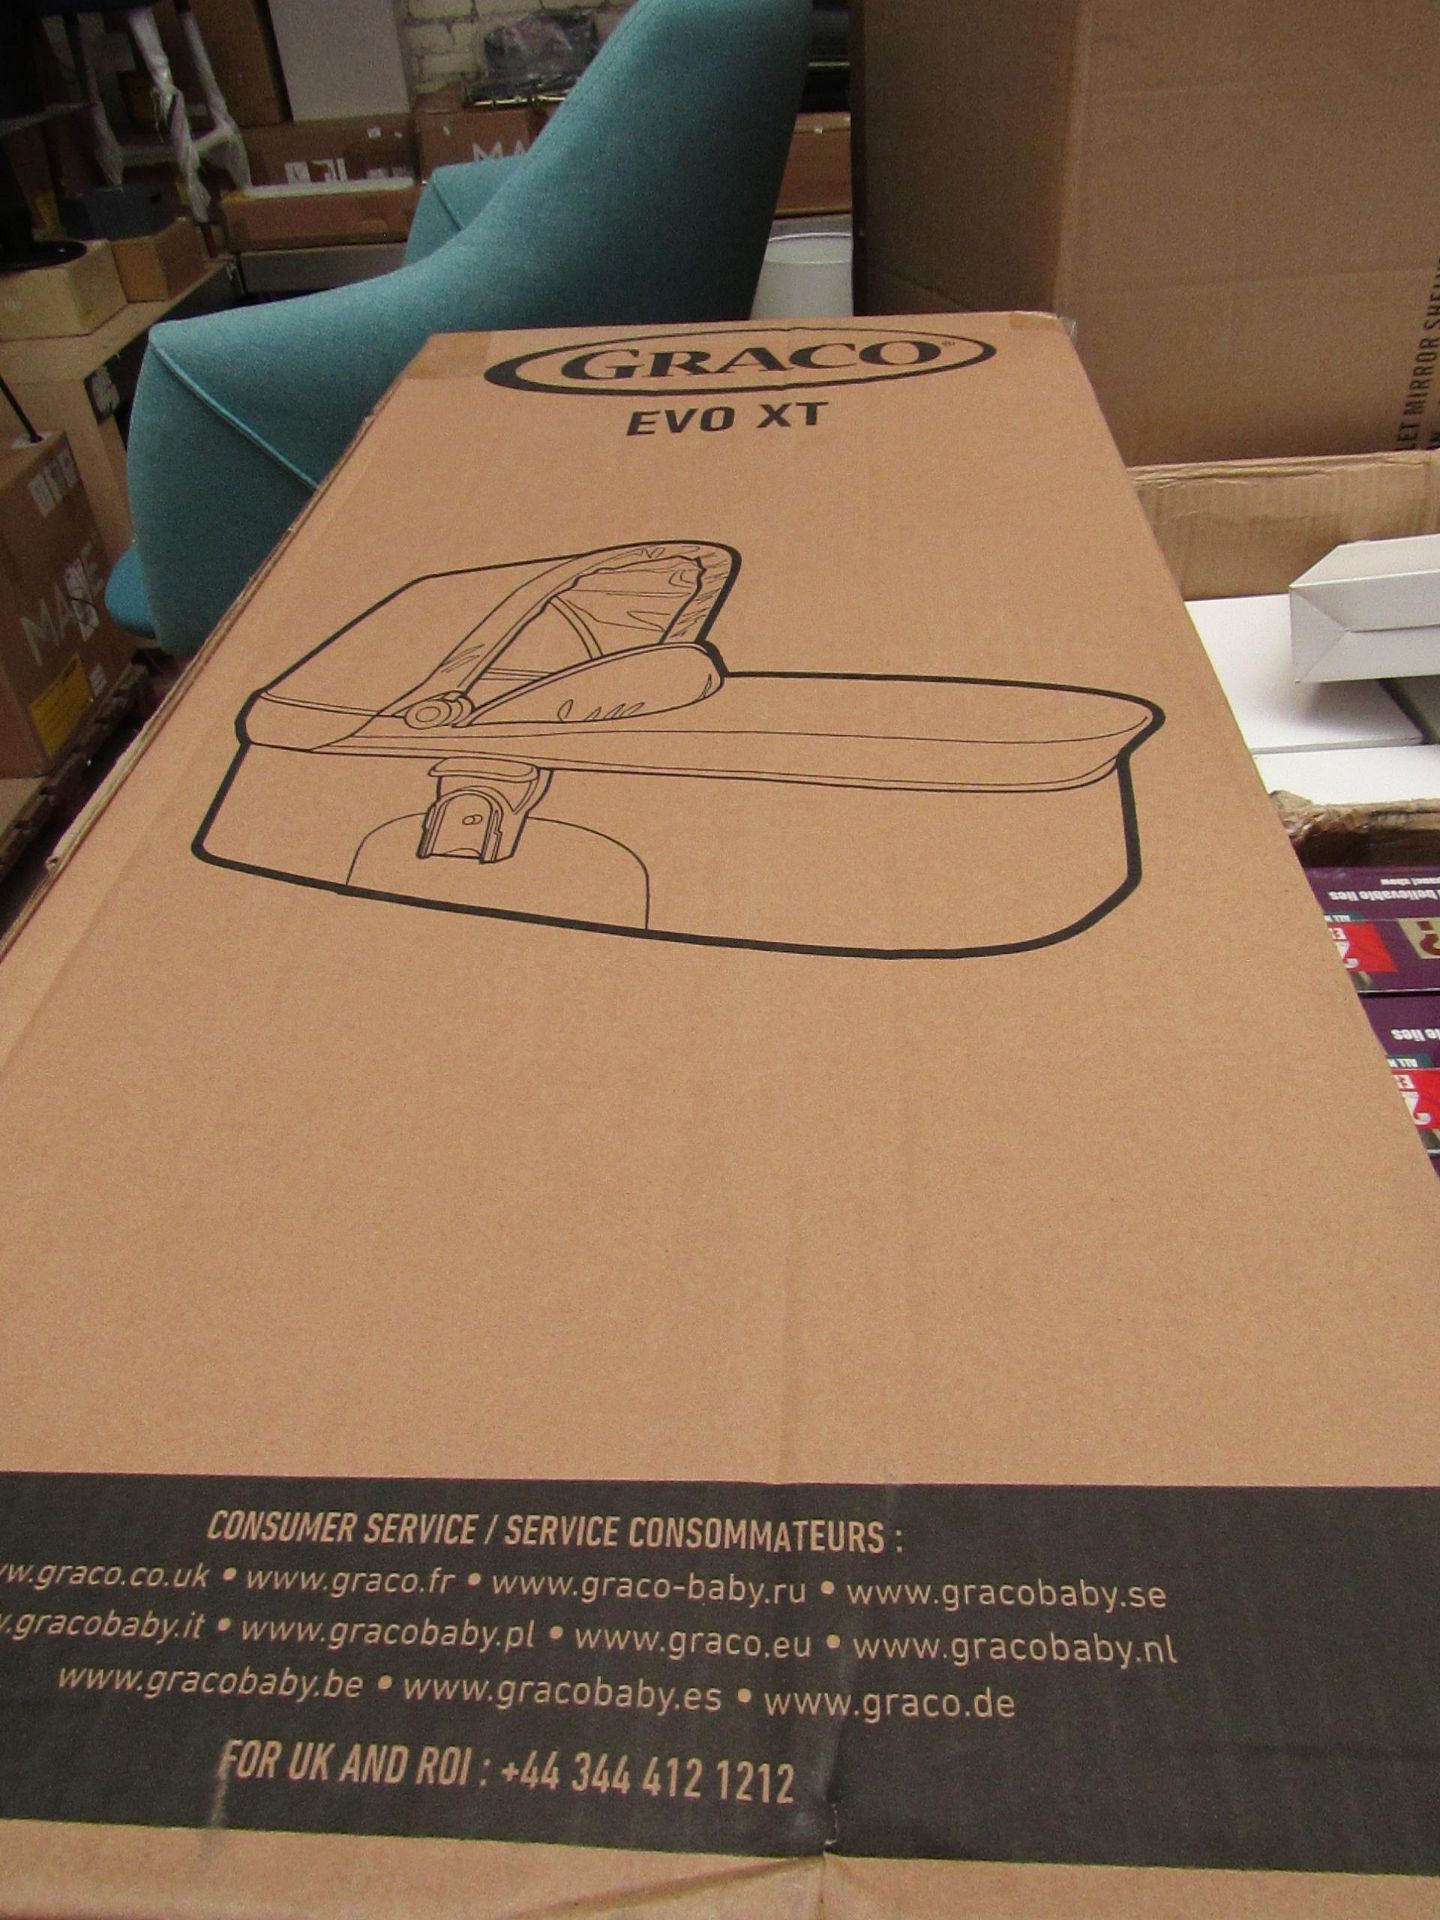 1X GRACO EVO XT, SUITABLE FOR A CHILD WHO CAN NOT SIT UP UNAIDED, UNCHECKED AND BOXED.